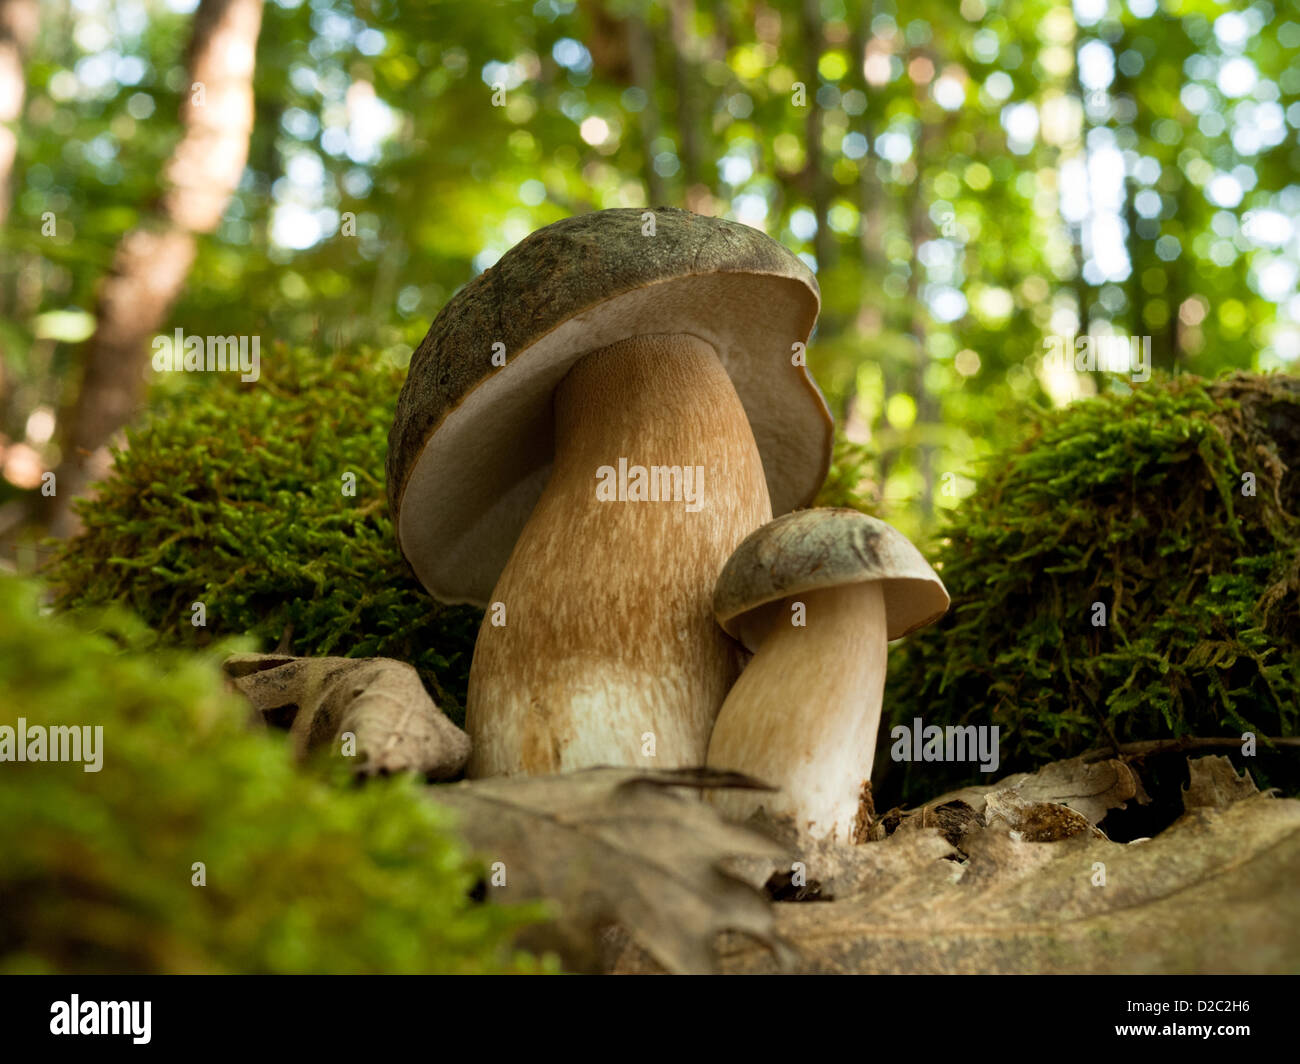 The Cep, Penny Bun, Porcini - all used to describe the Boletus edulis or Boletus aureus mushroom, highly prized for its culinary qualities Stock Photo